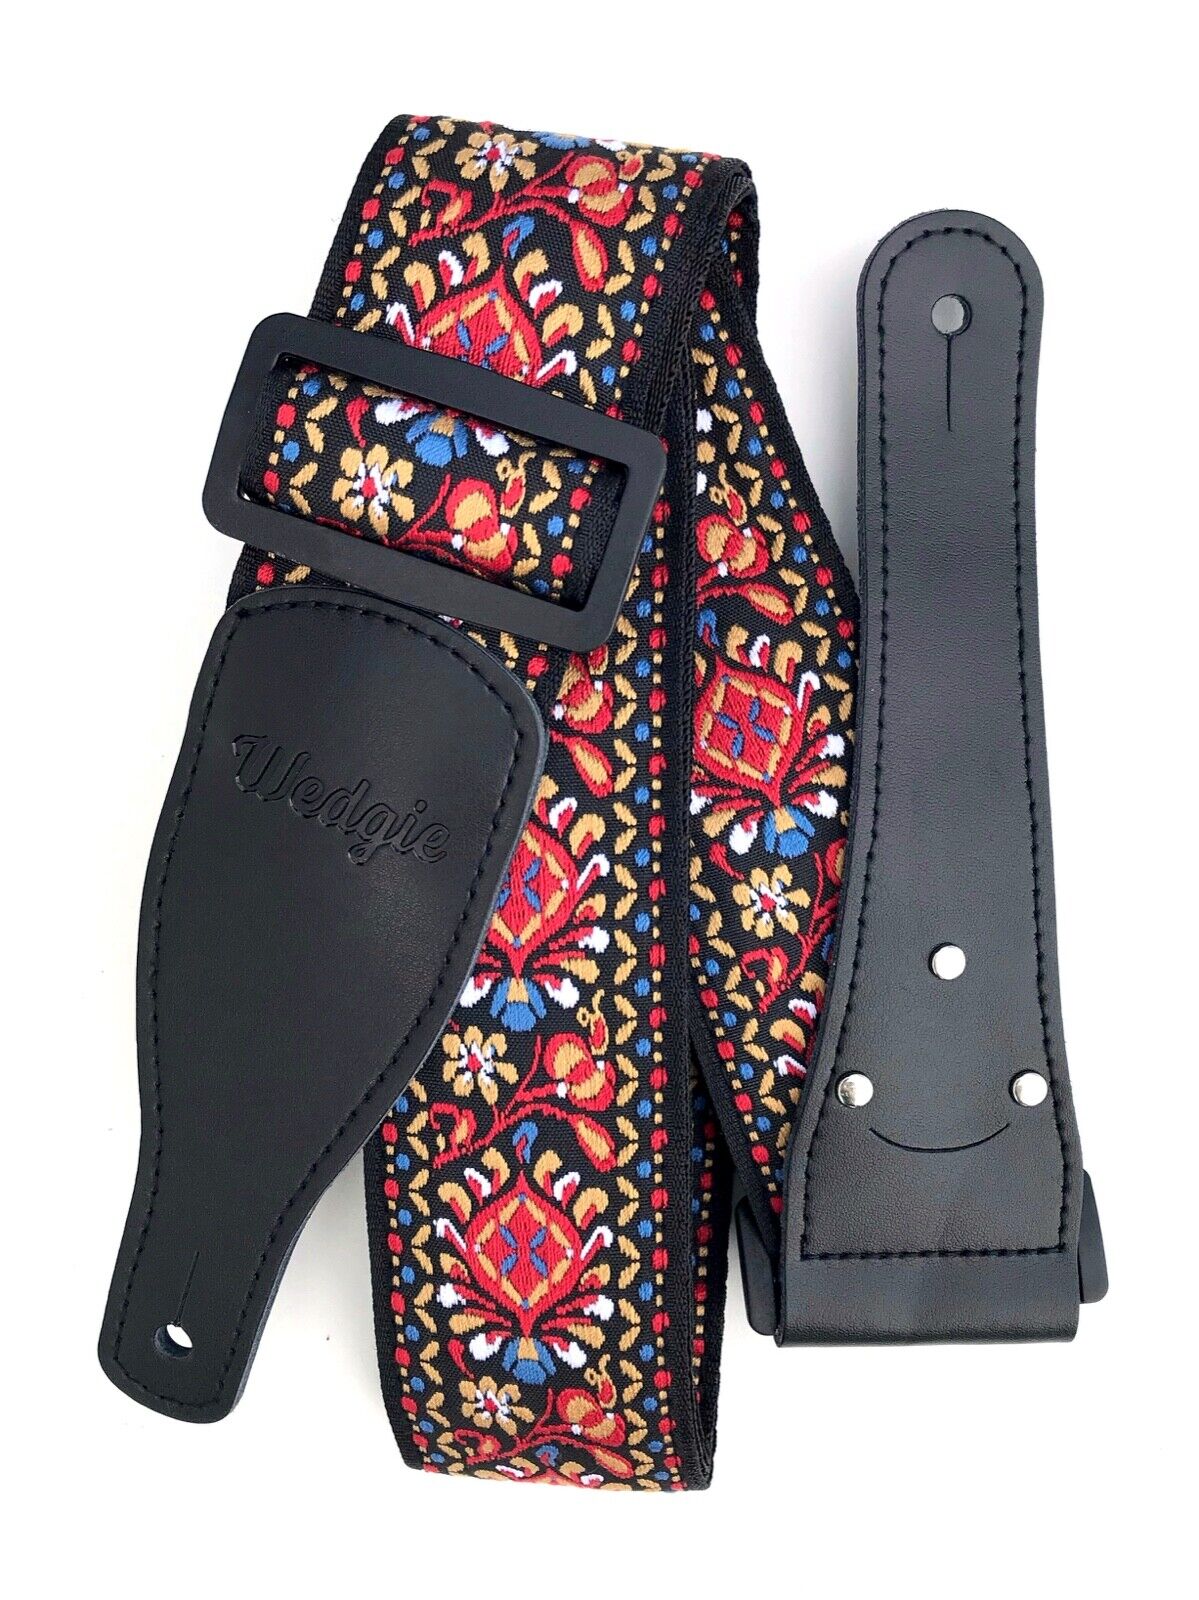 Wedgie Jacquard Weave Guitar Strap with Pick Holder, Red with Blue Accents